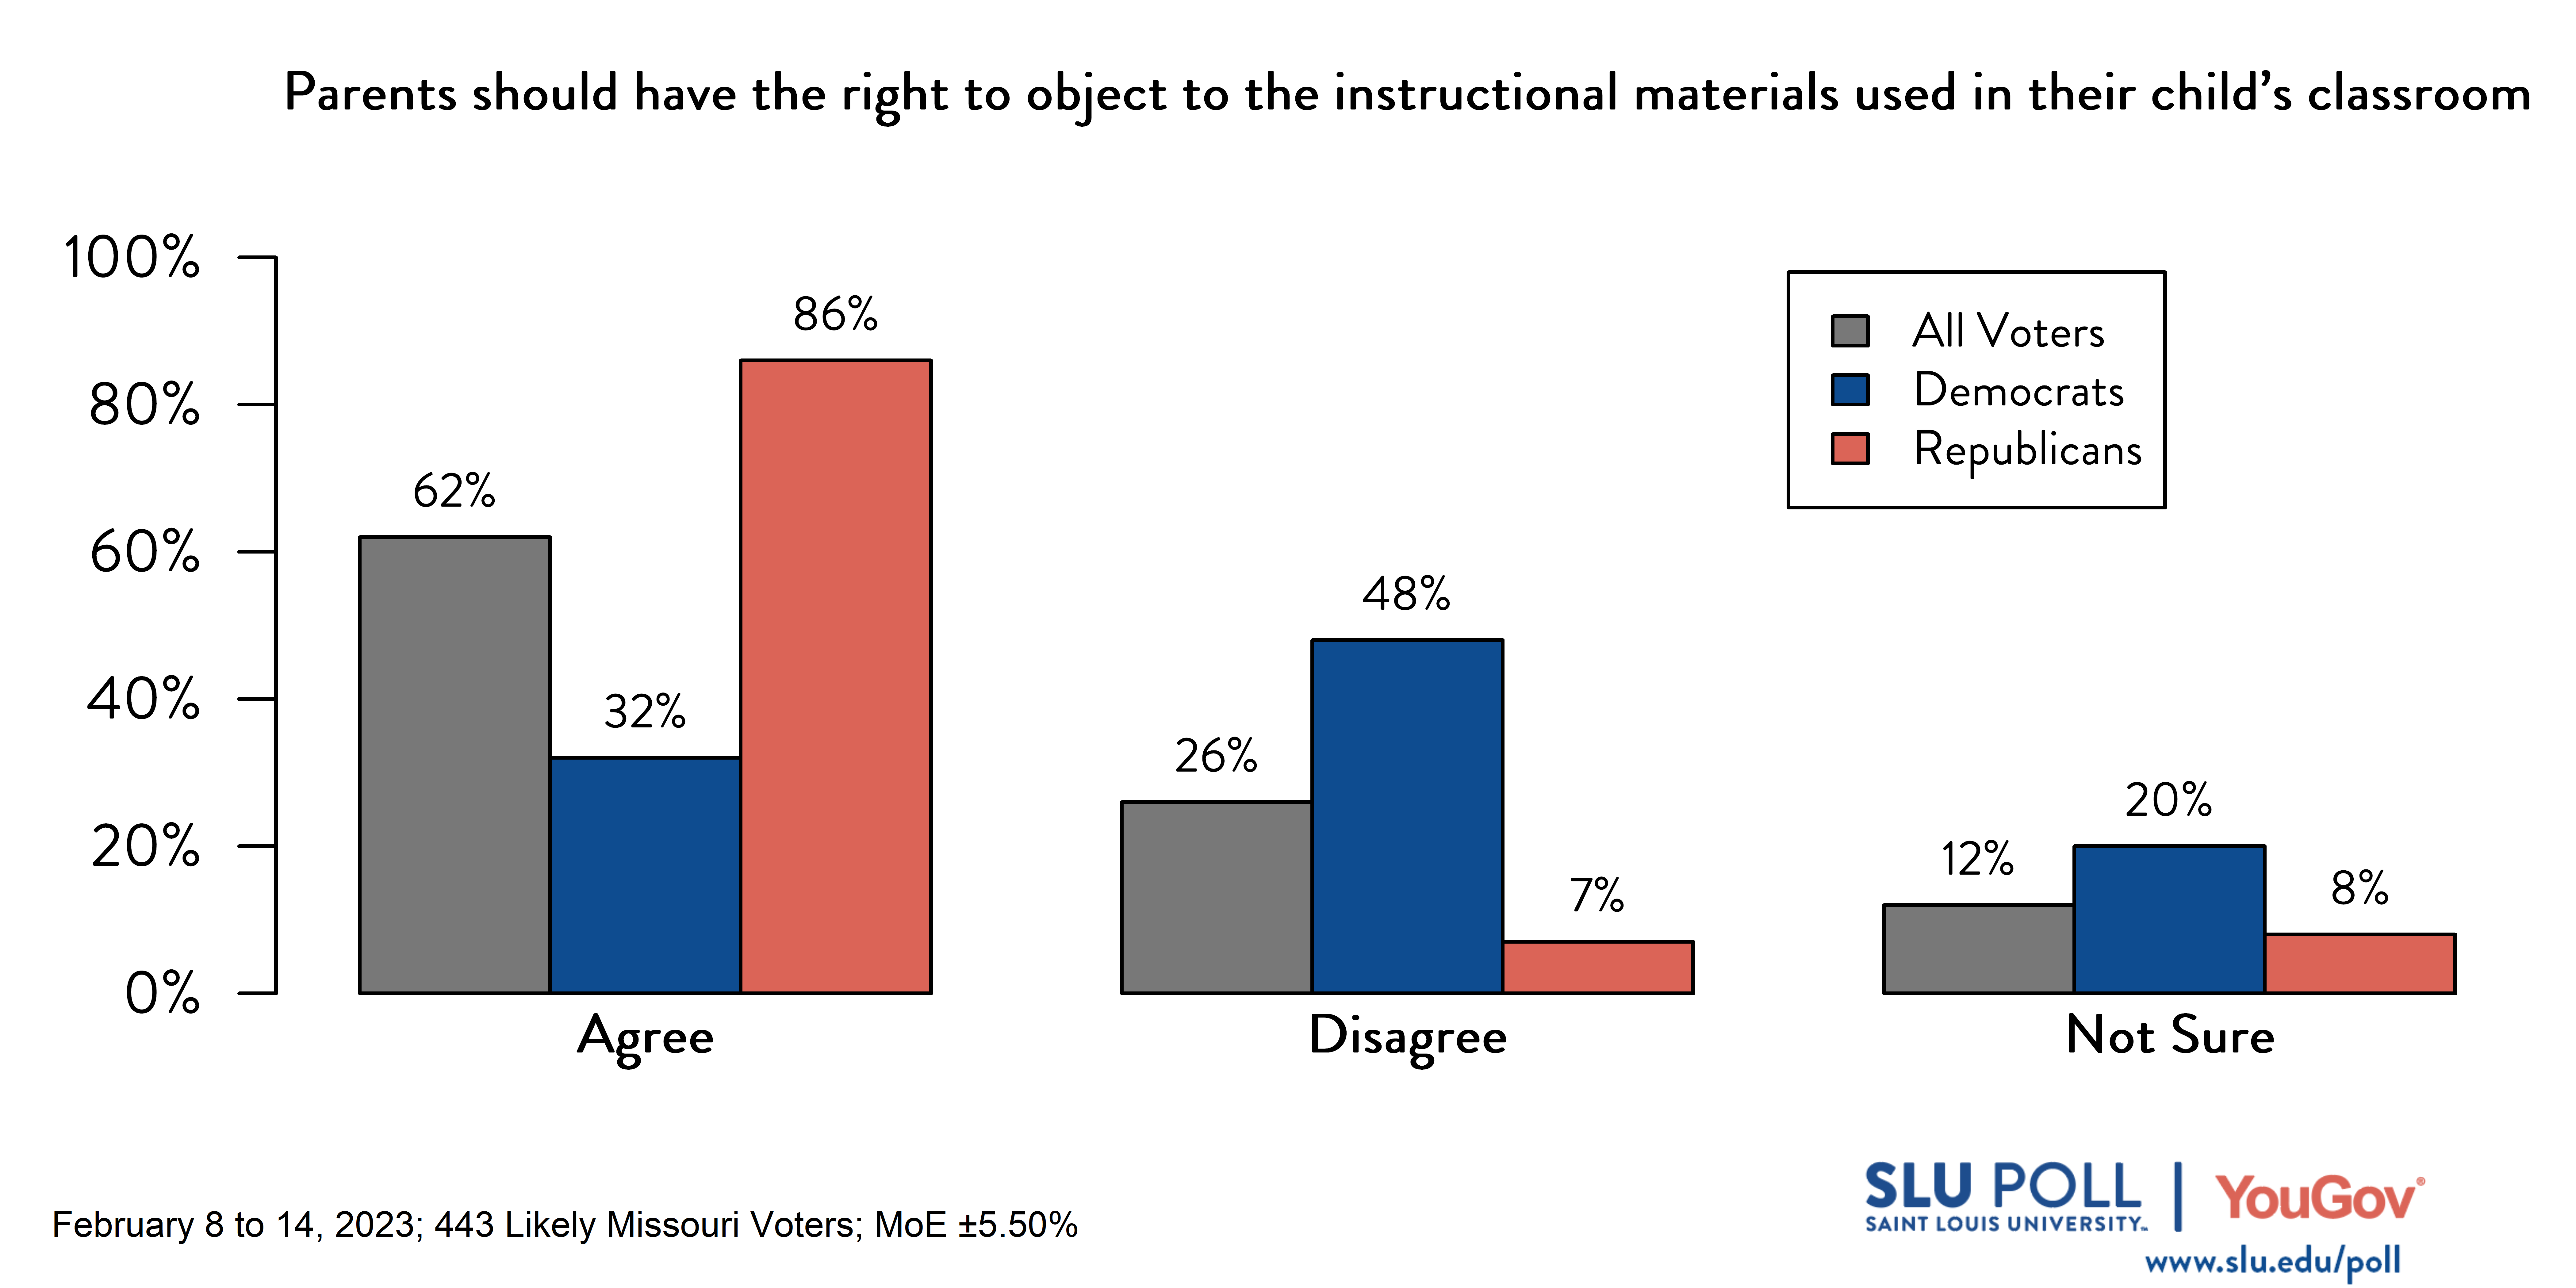 Likely voters' responses to 'Do you agree or disagree with the following statements: Parents of students should have the right to object to the instructional materials used in their child's classroom?': 62% Agree, 26% Disagree, and 12% Not sure. Democratic voters' responses: ' 32% Agree, 48% Disagree, and 20% Not sure. Republican voters' responses: 86% Agree, 7% Disagree, and 8% Not sure.